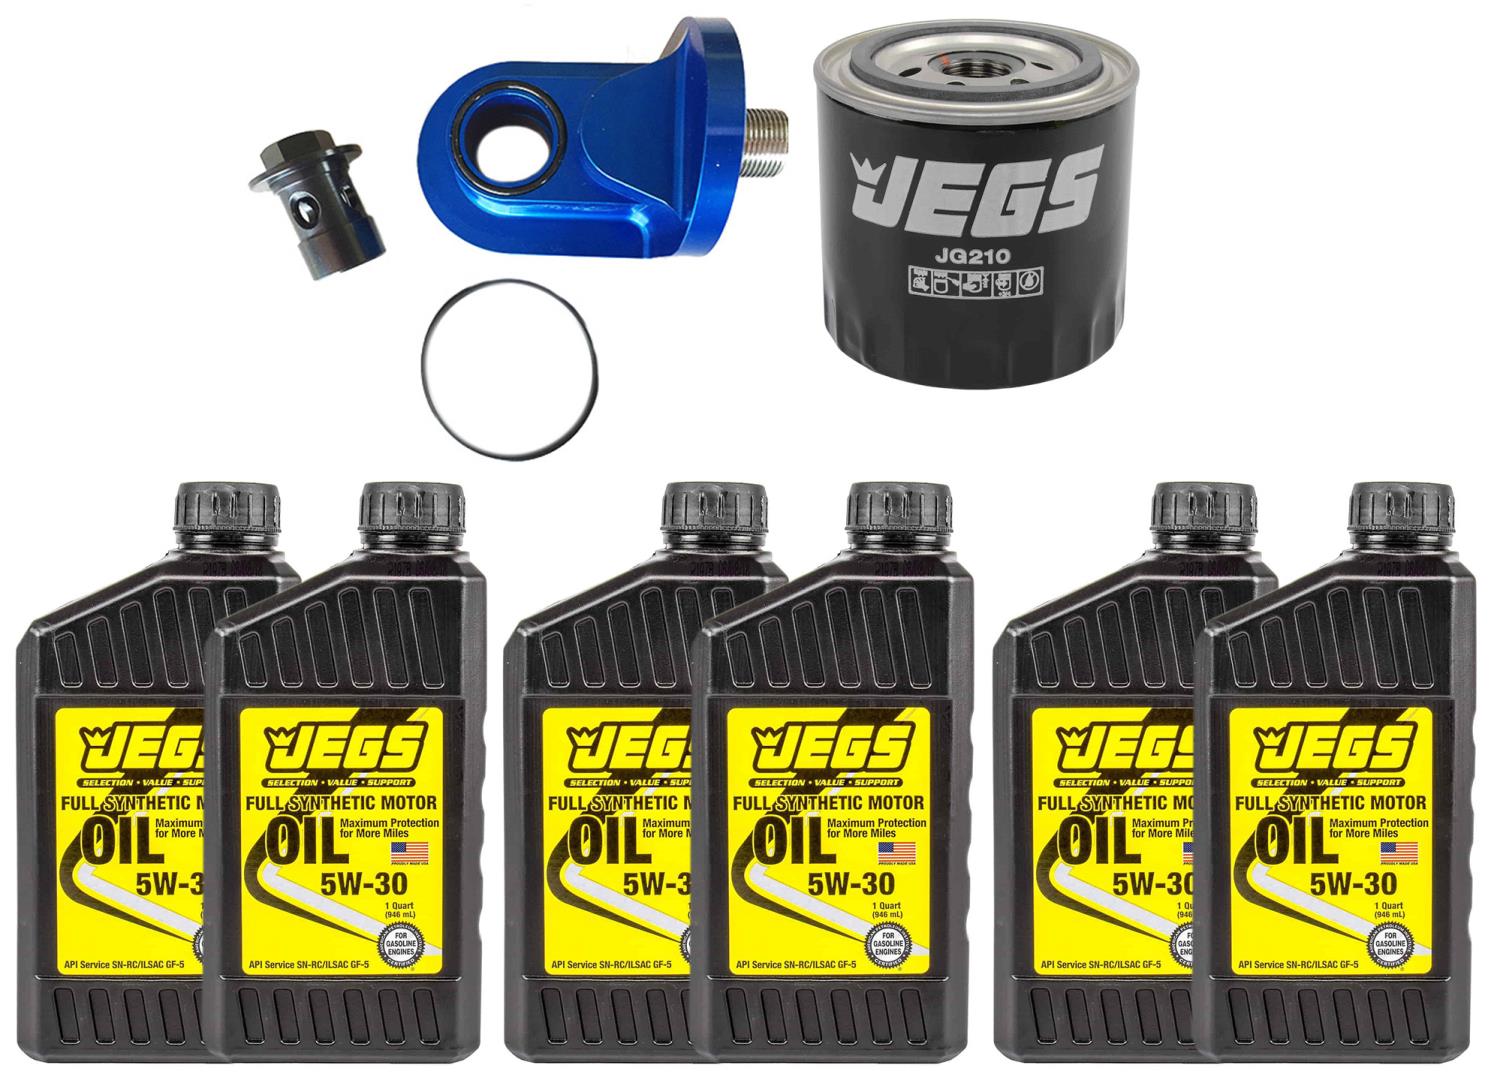 90-Degree Oil Filter Adapter, Oil Filter, and 5W30